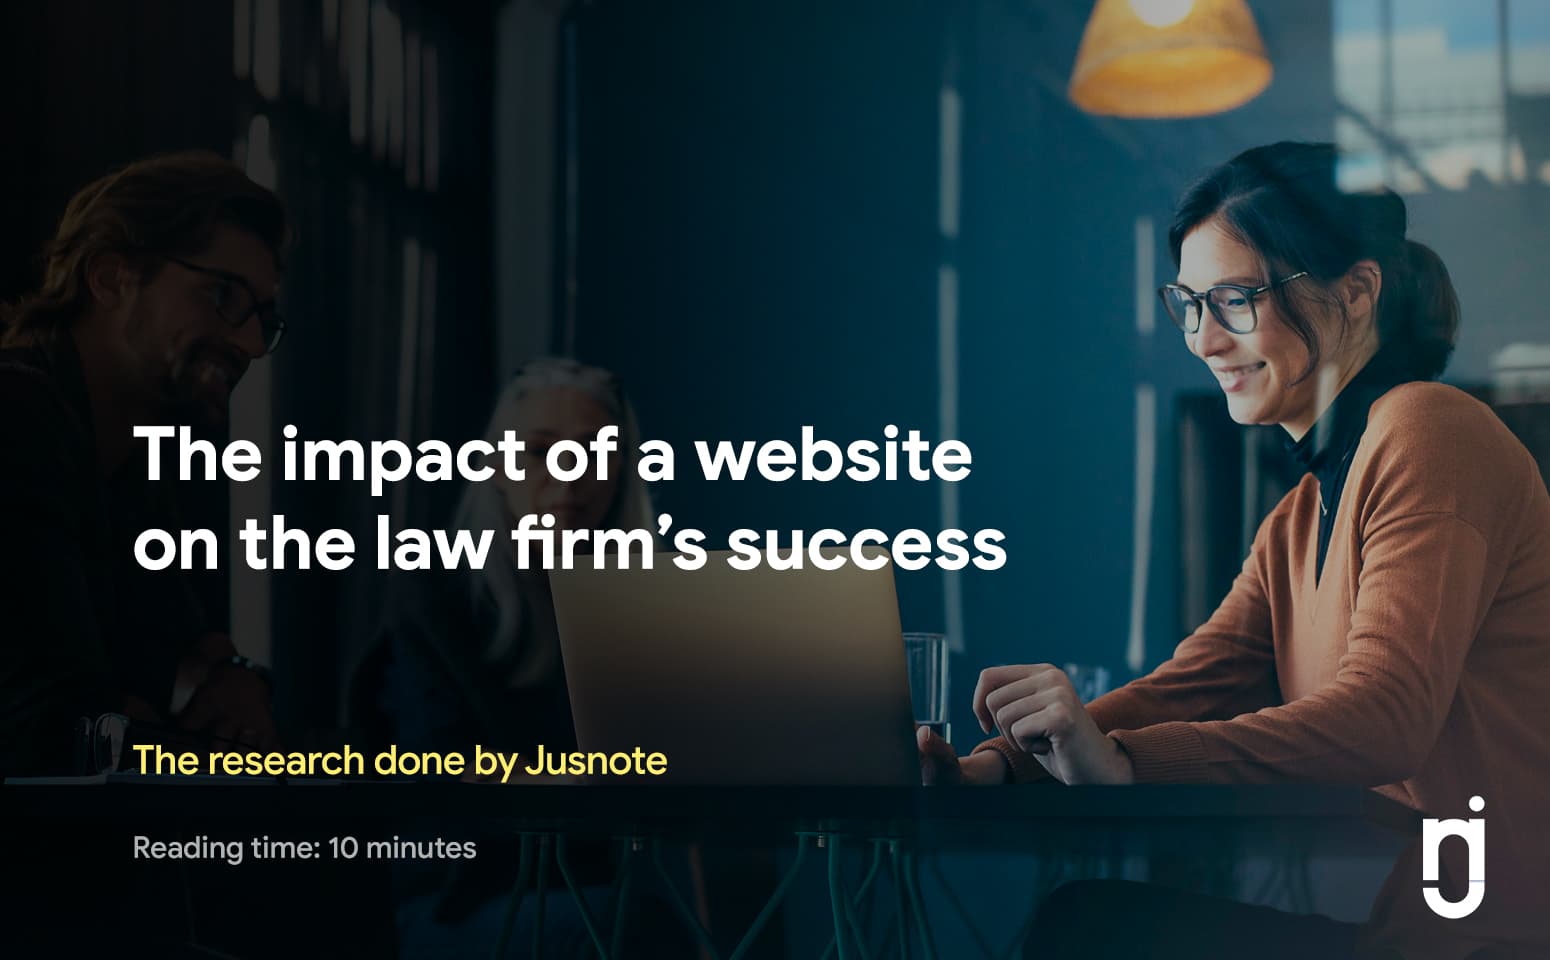 Jusnote websites research